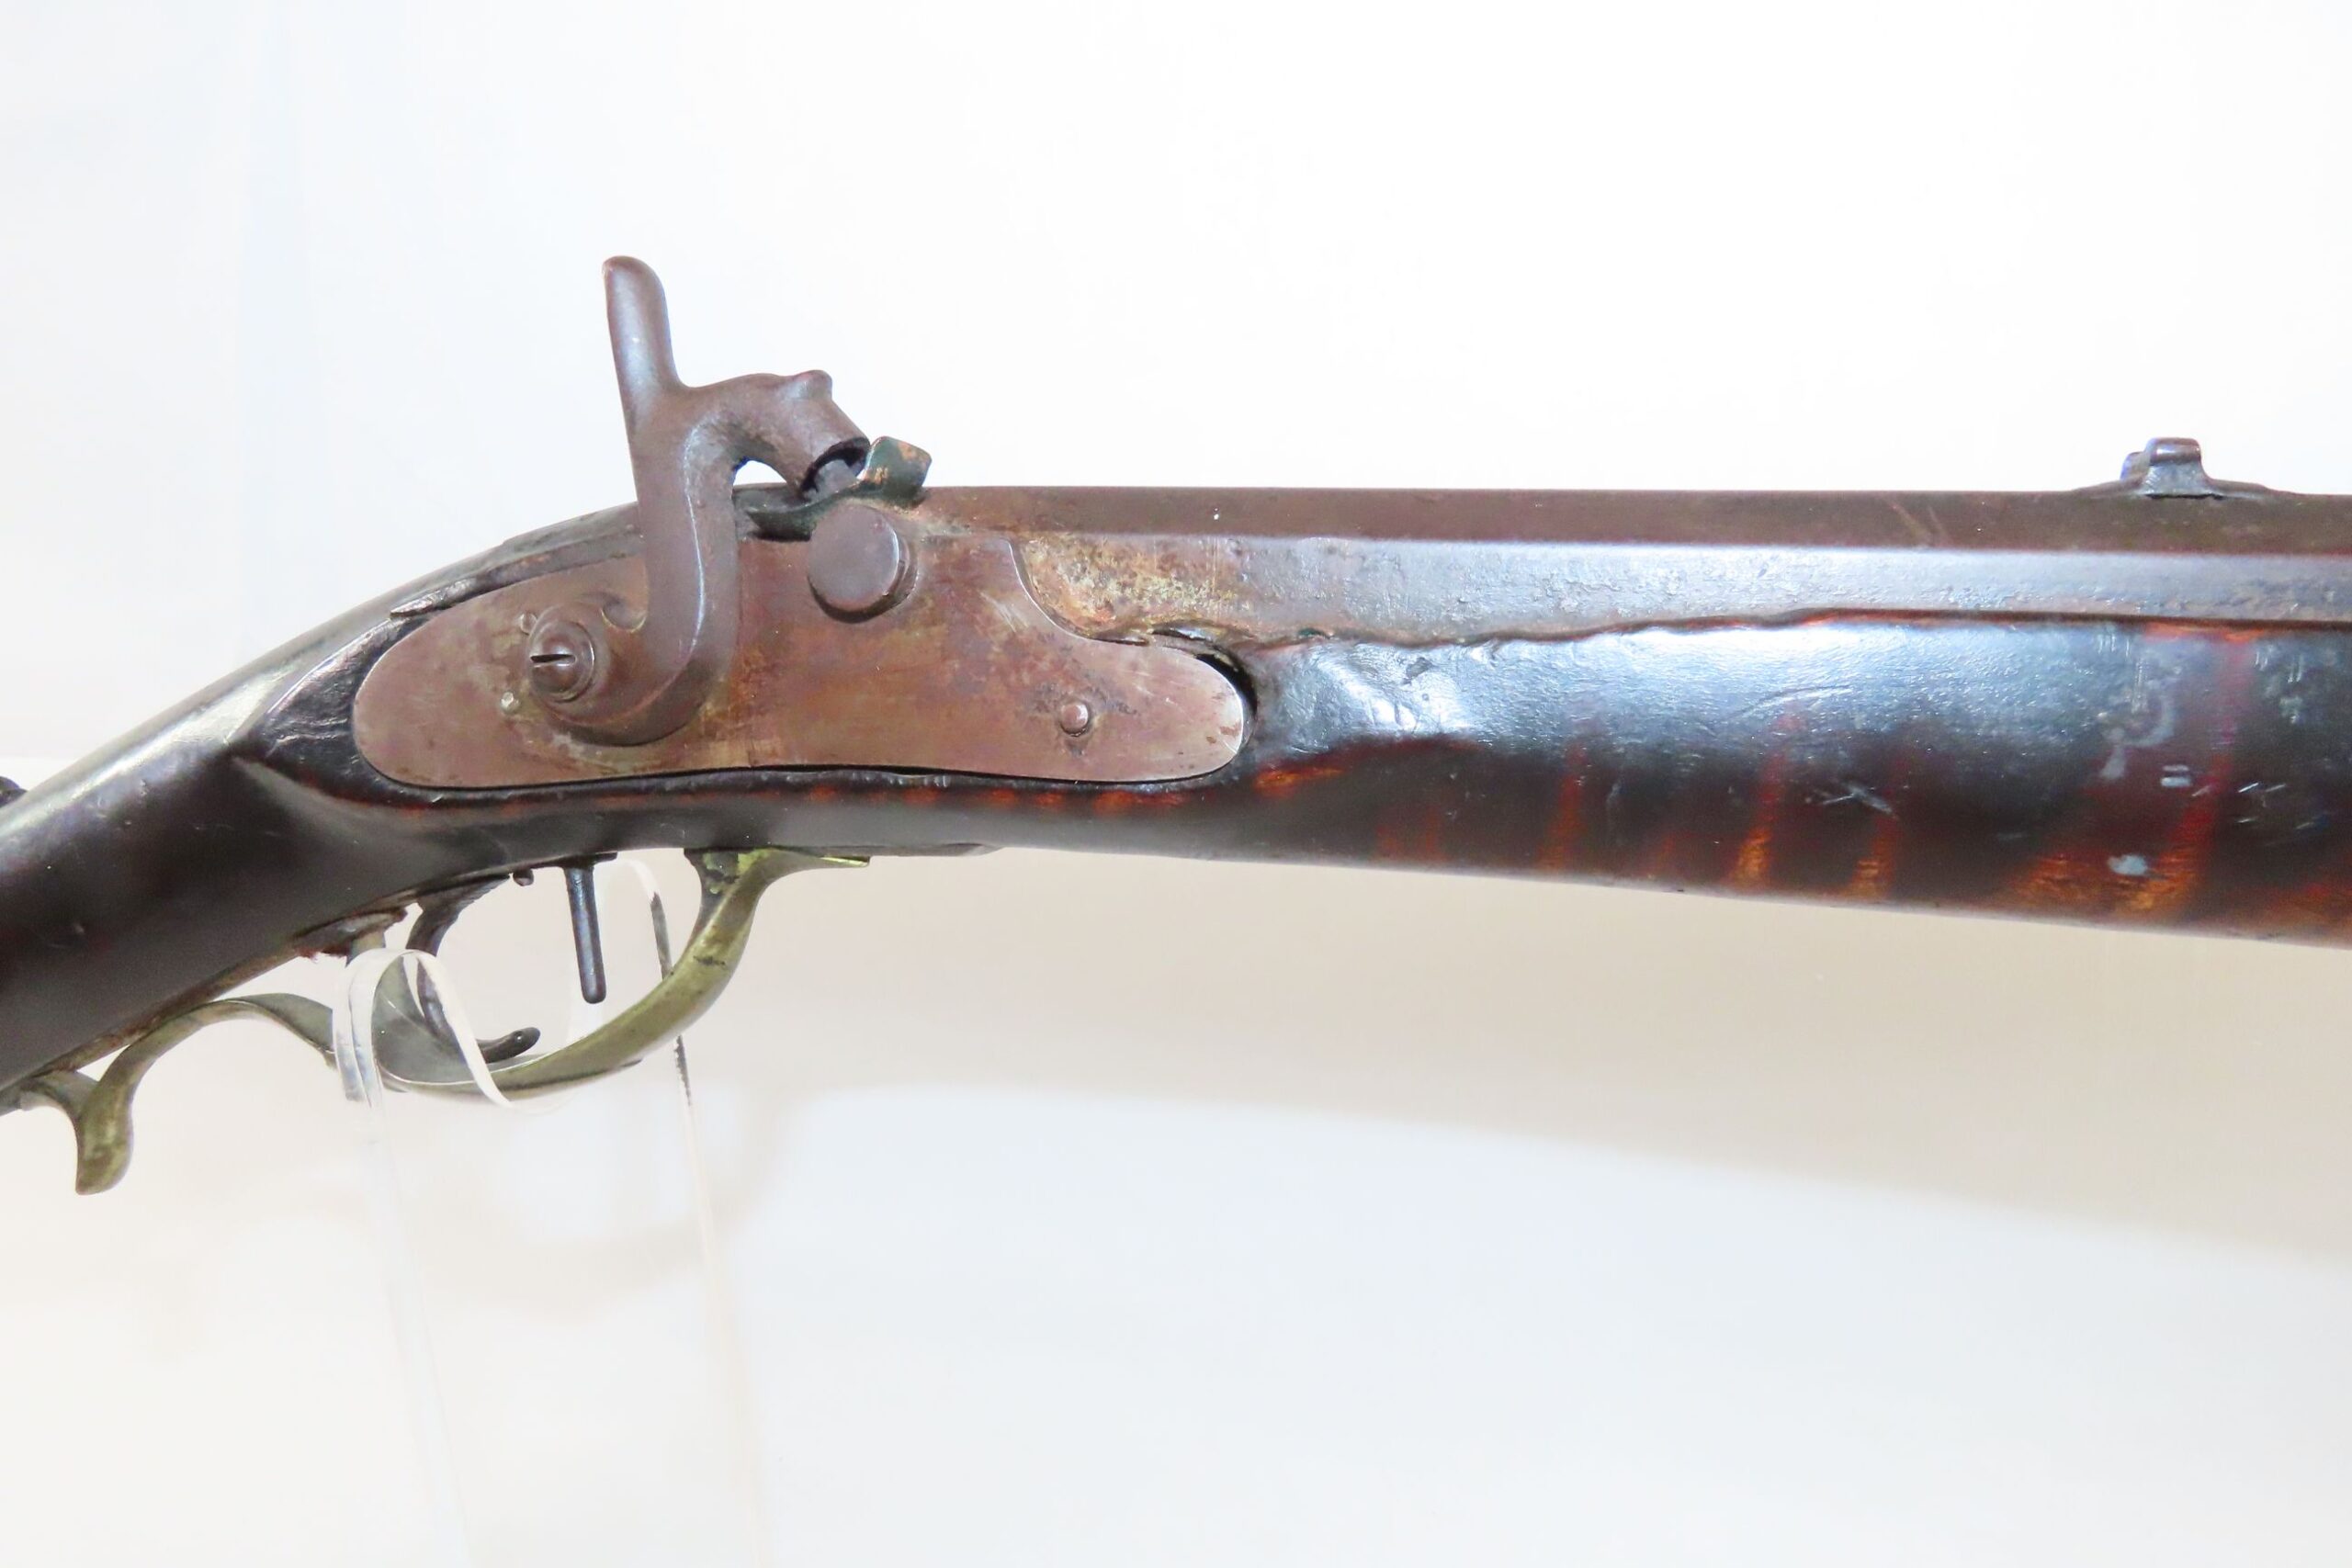 What Made the Kentucky Rifle So Great? - Outdoor Revival